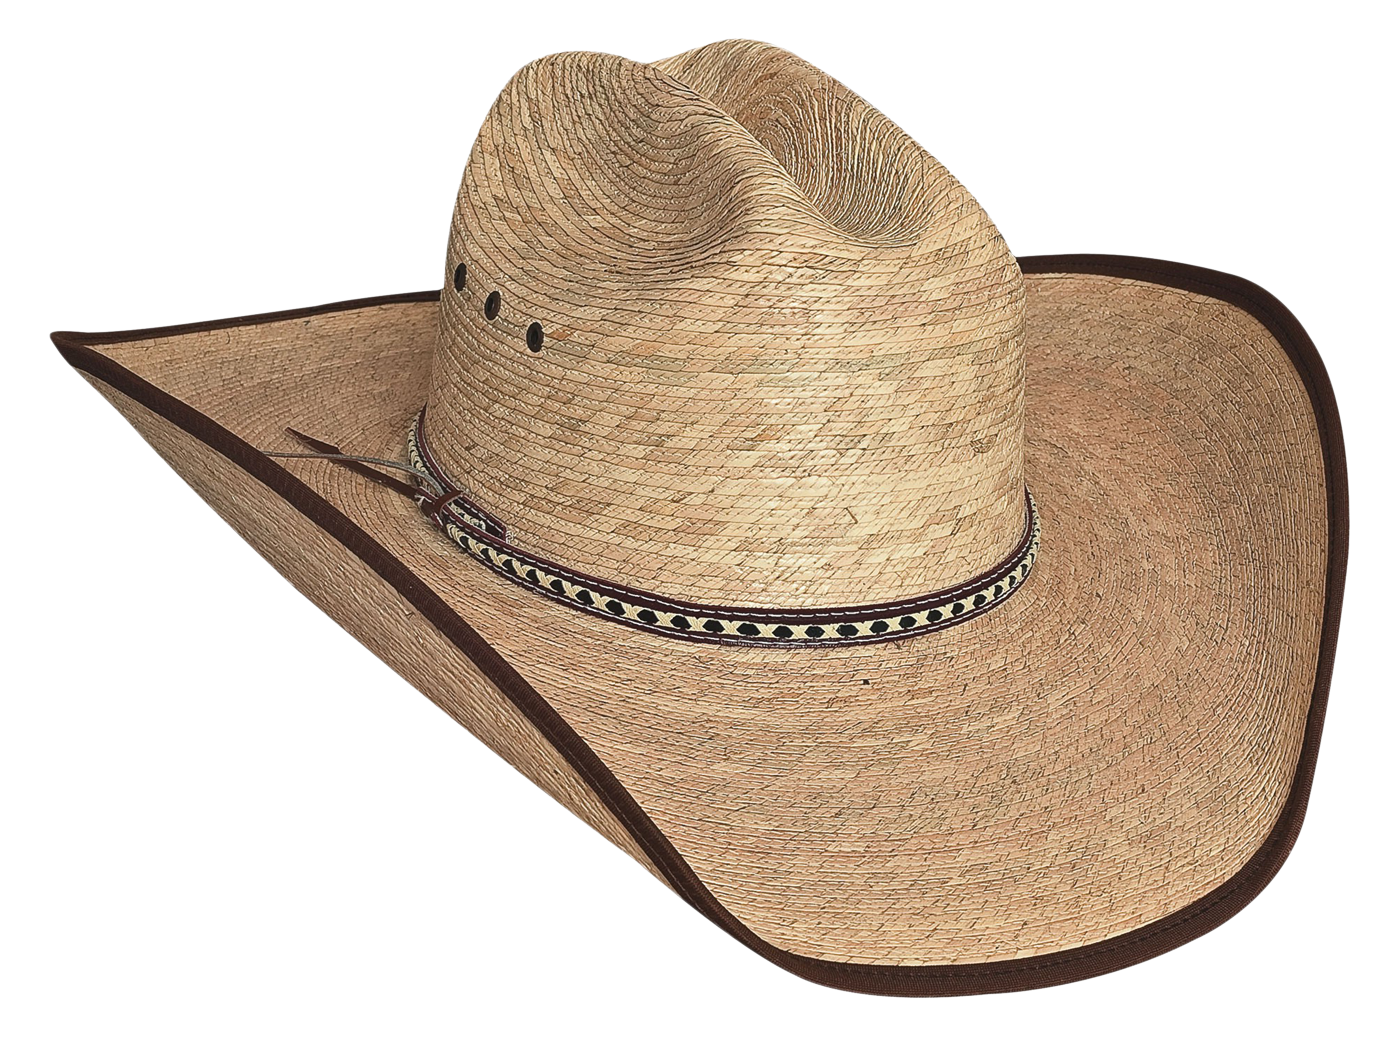 Straw Cowboy Hat Isolated